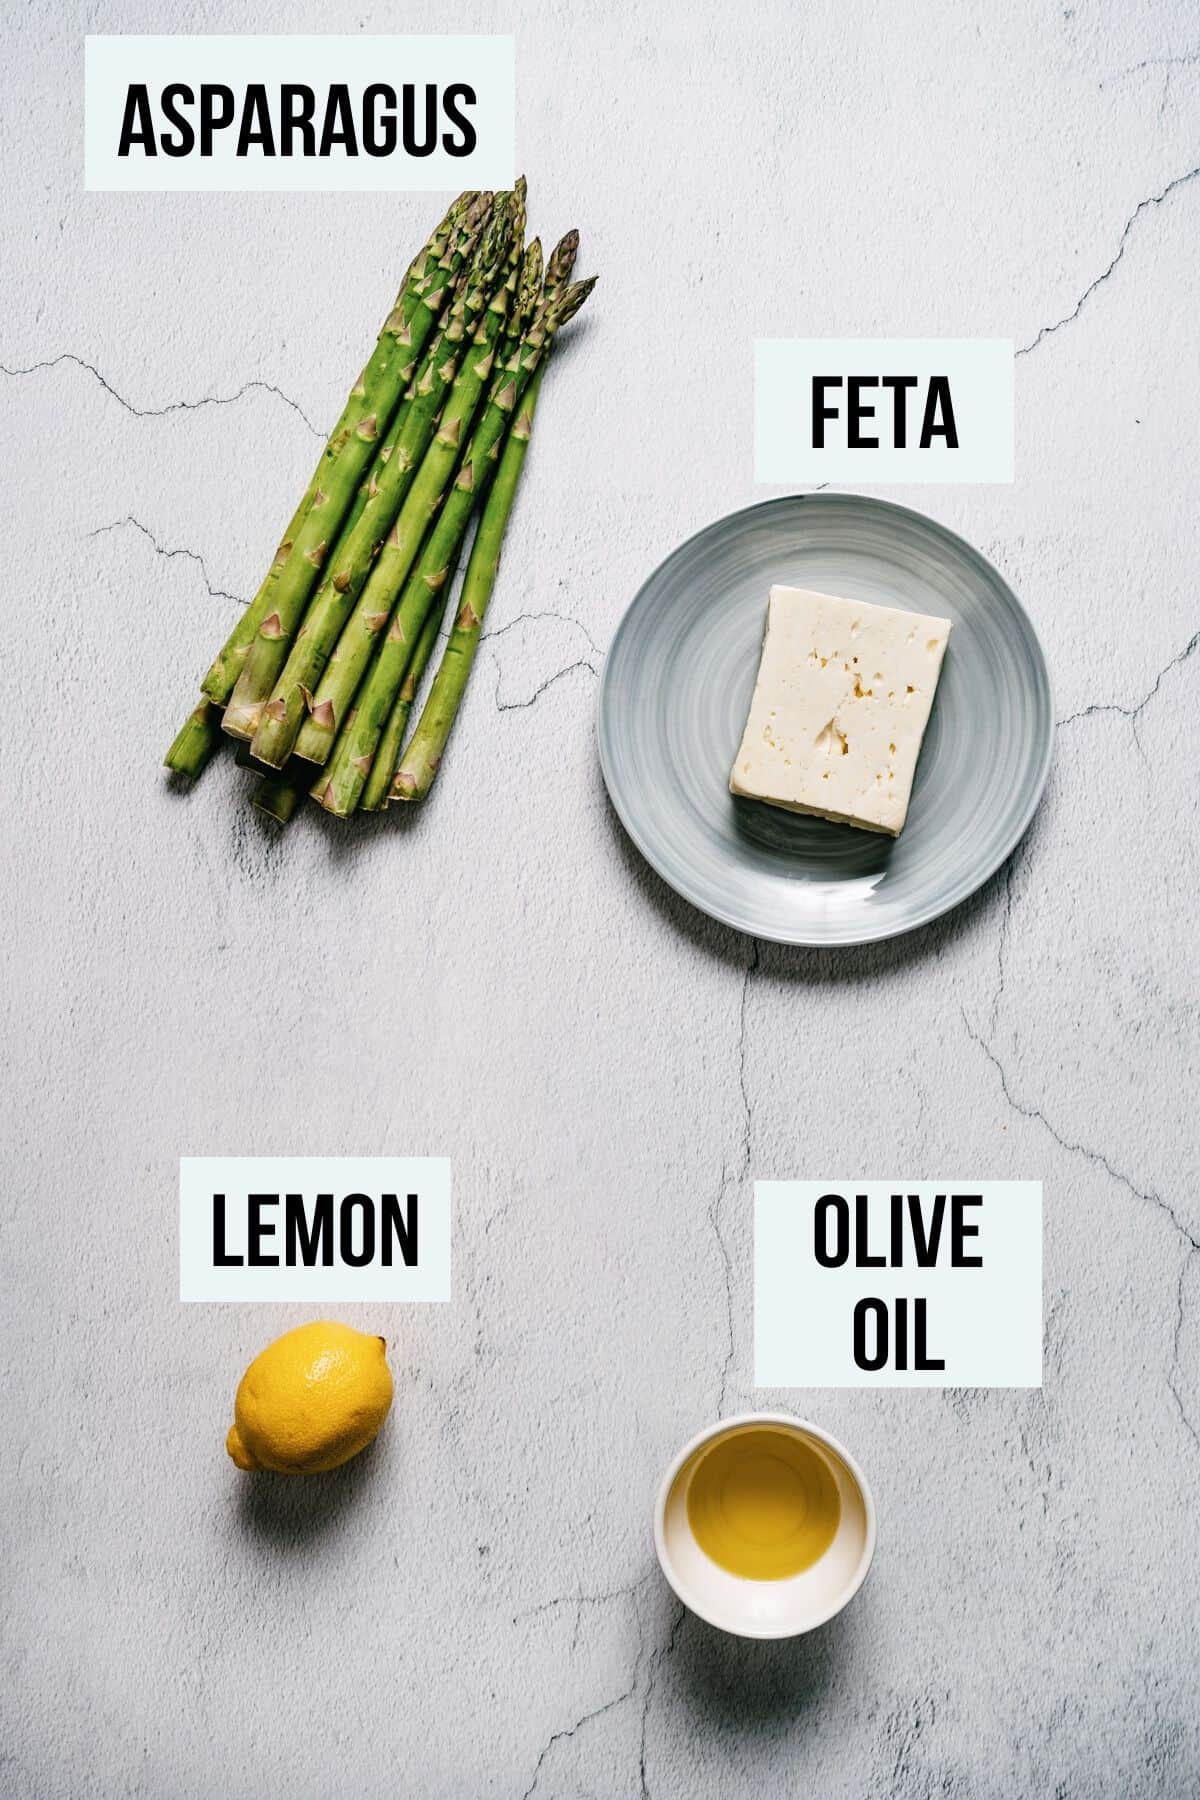 ingredients on a white table to make asparagus with feta.